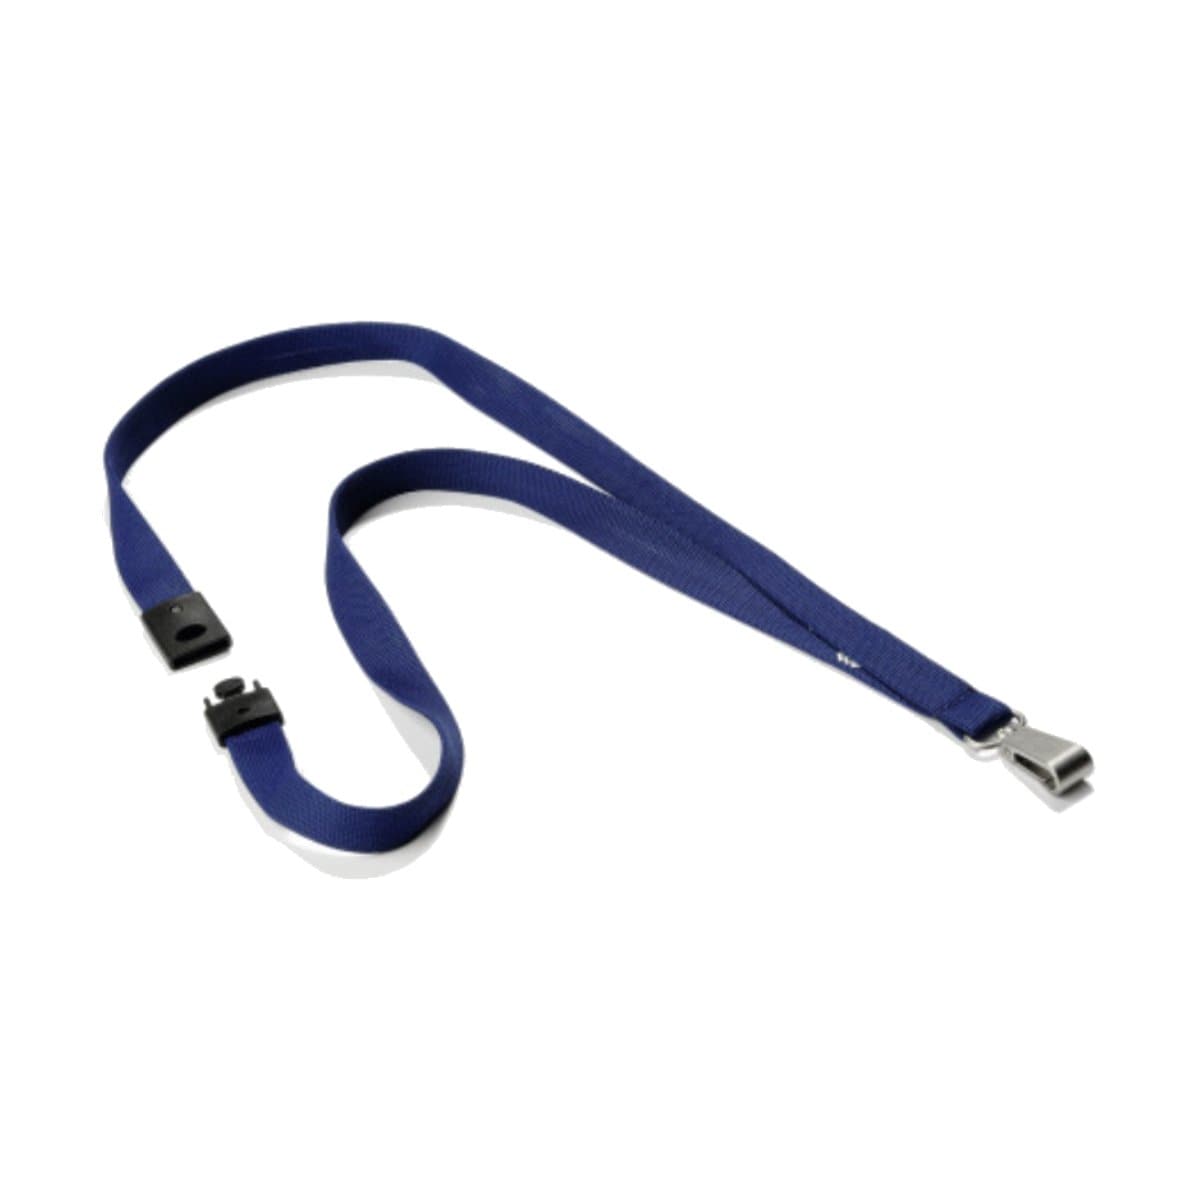 Durable Textile Lanyard 15 mm, Midnight Blue